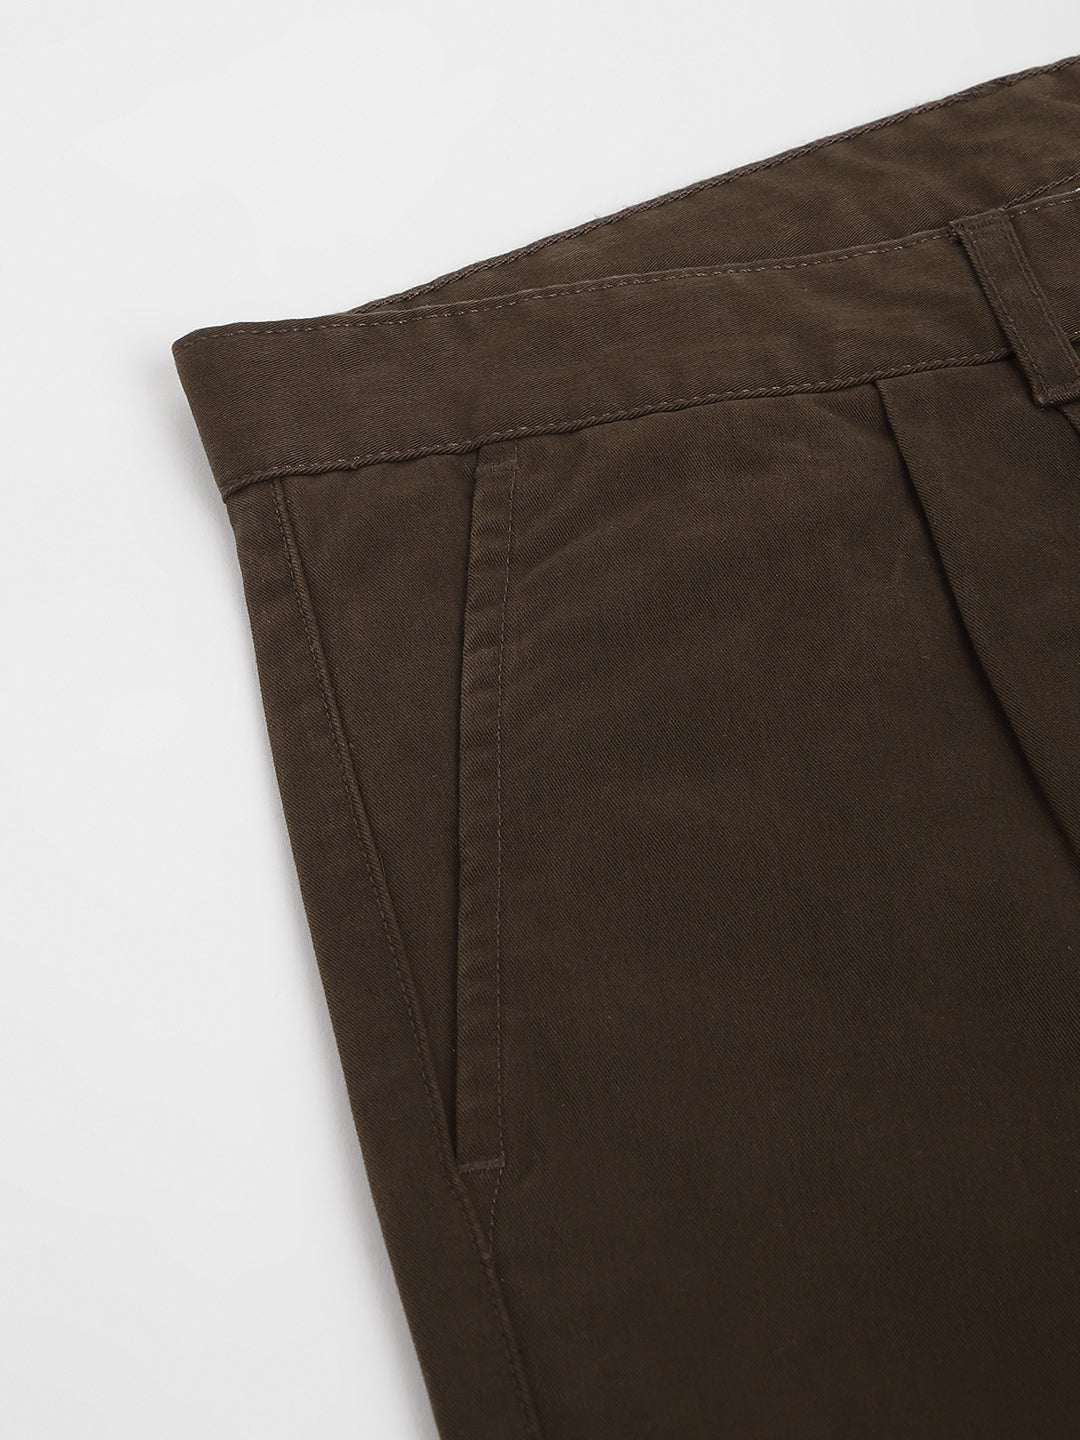 2 Way Stretch Pleated Chinos in Chocolate Brown- Comfort Fit